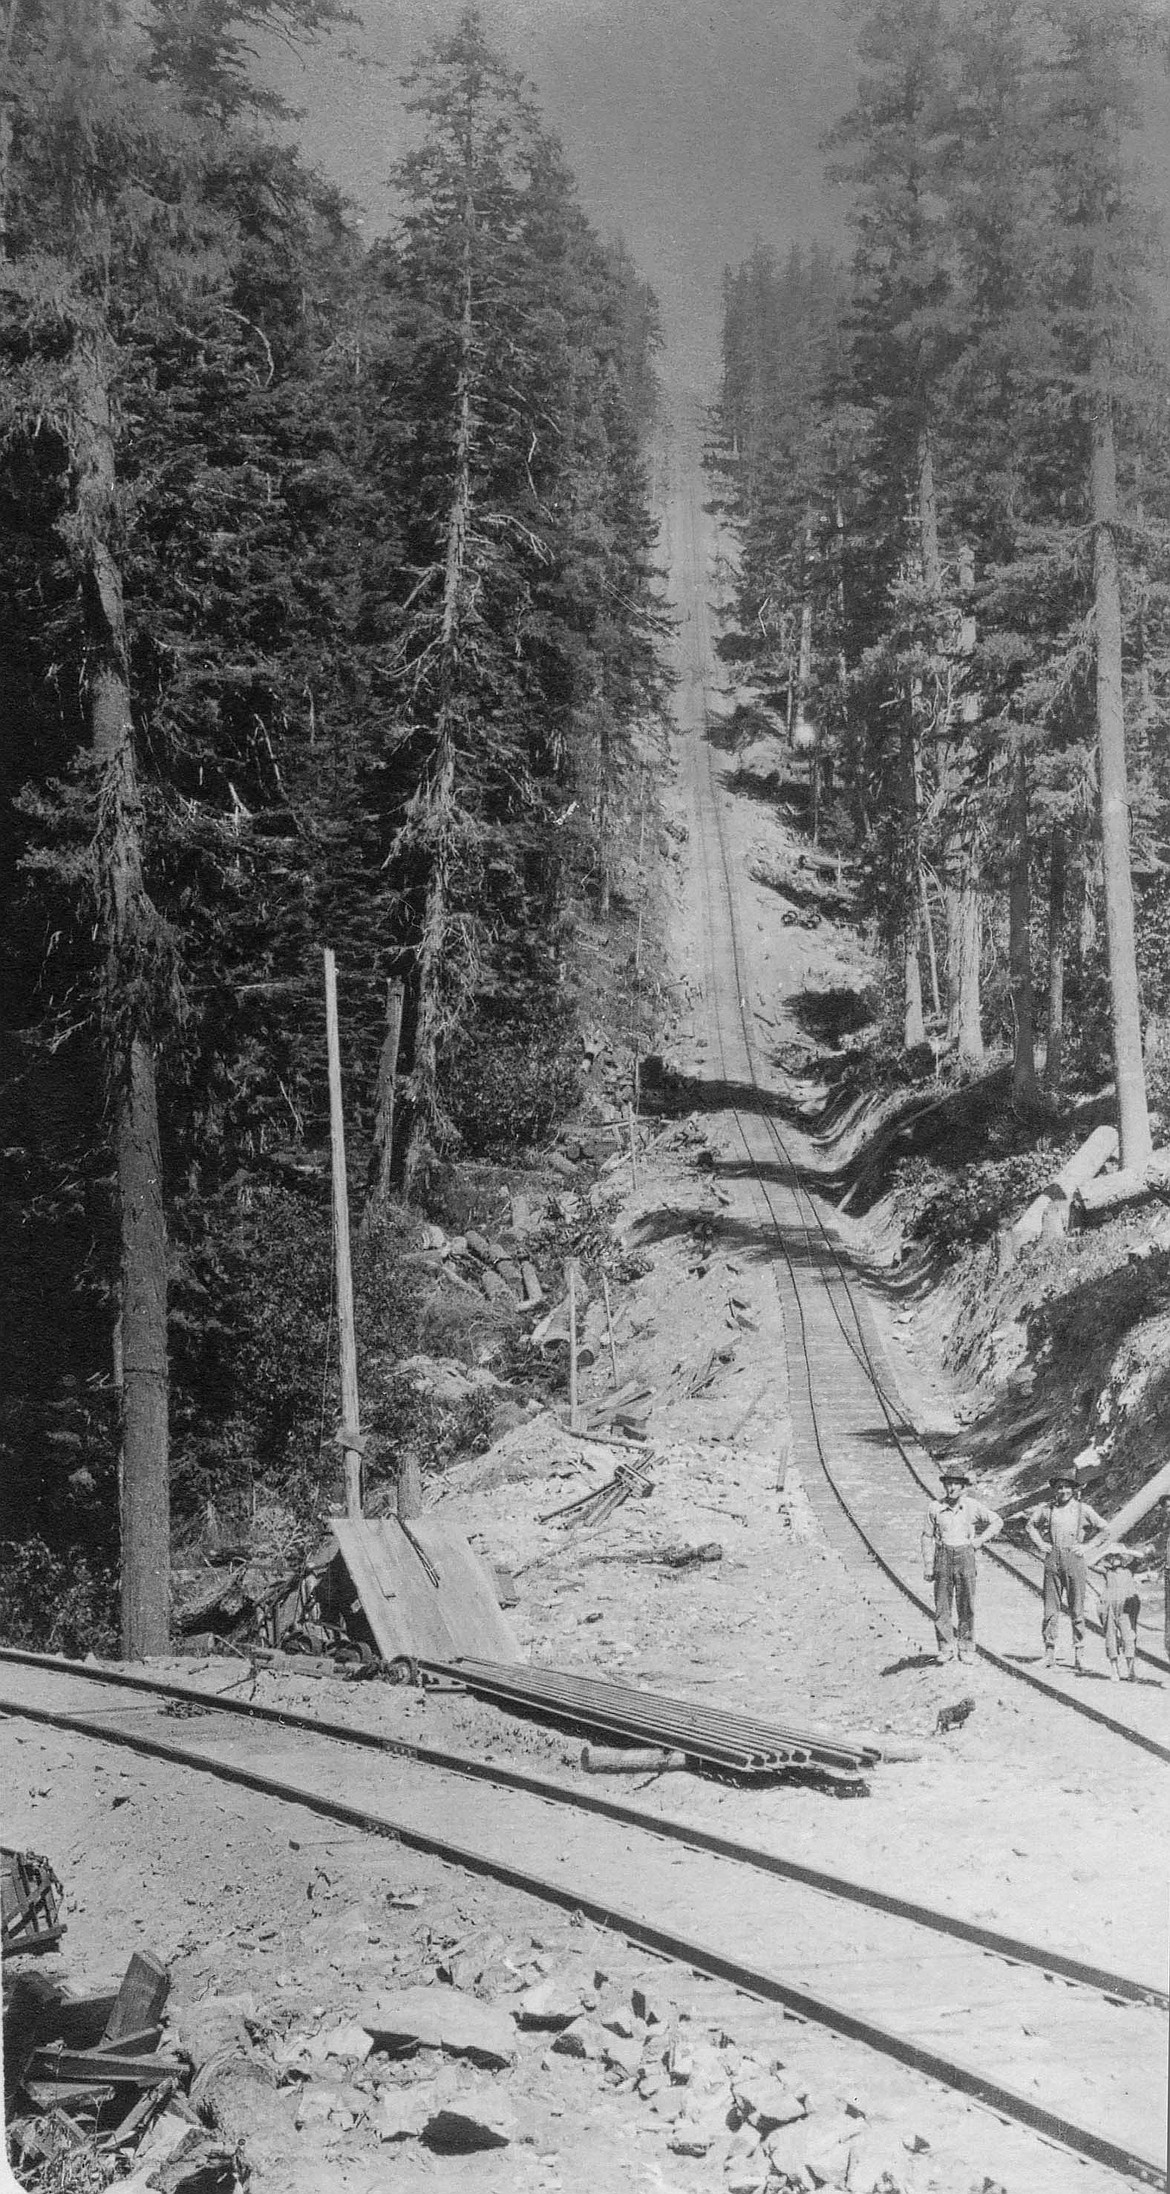 Three people stand at the bottom of the Incline railroad near Clarkia, Idaho.